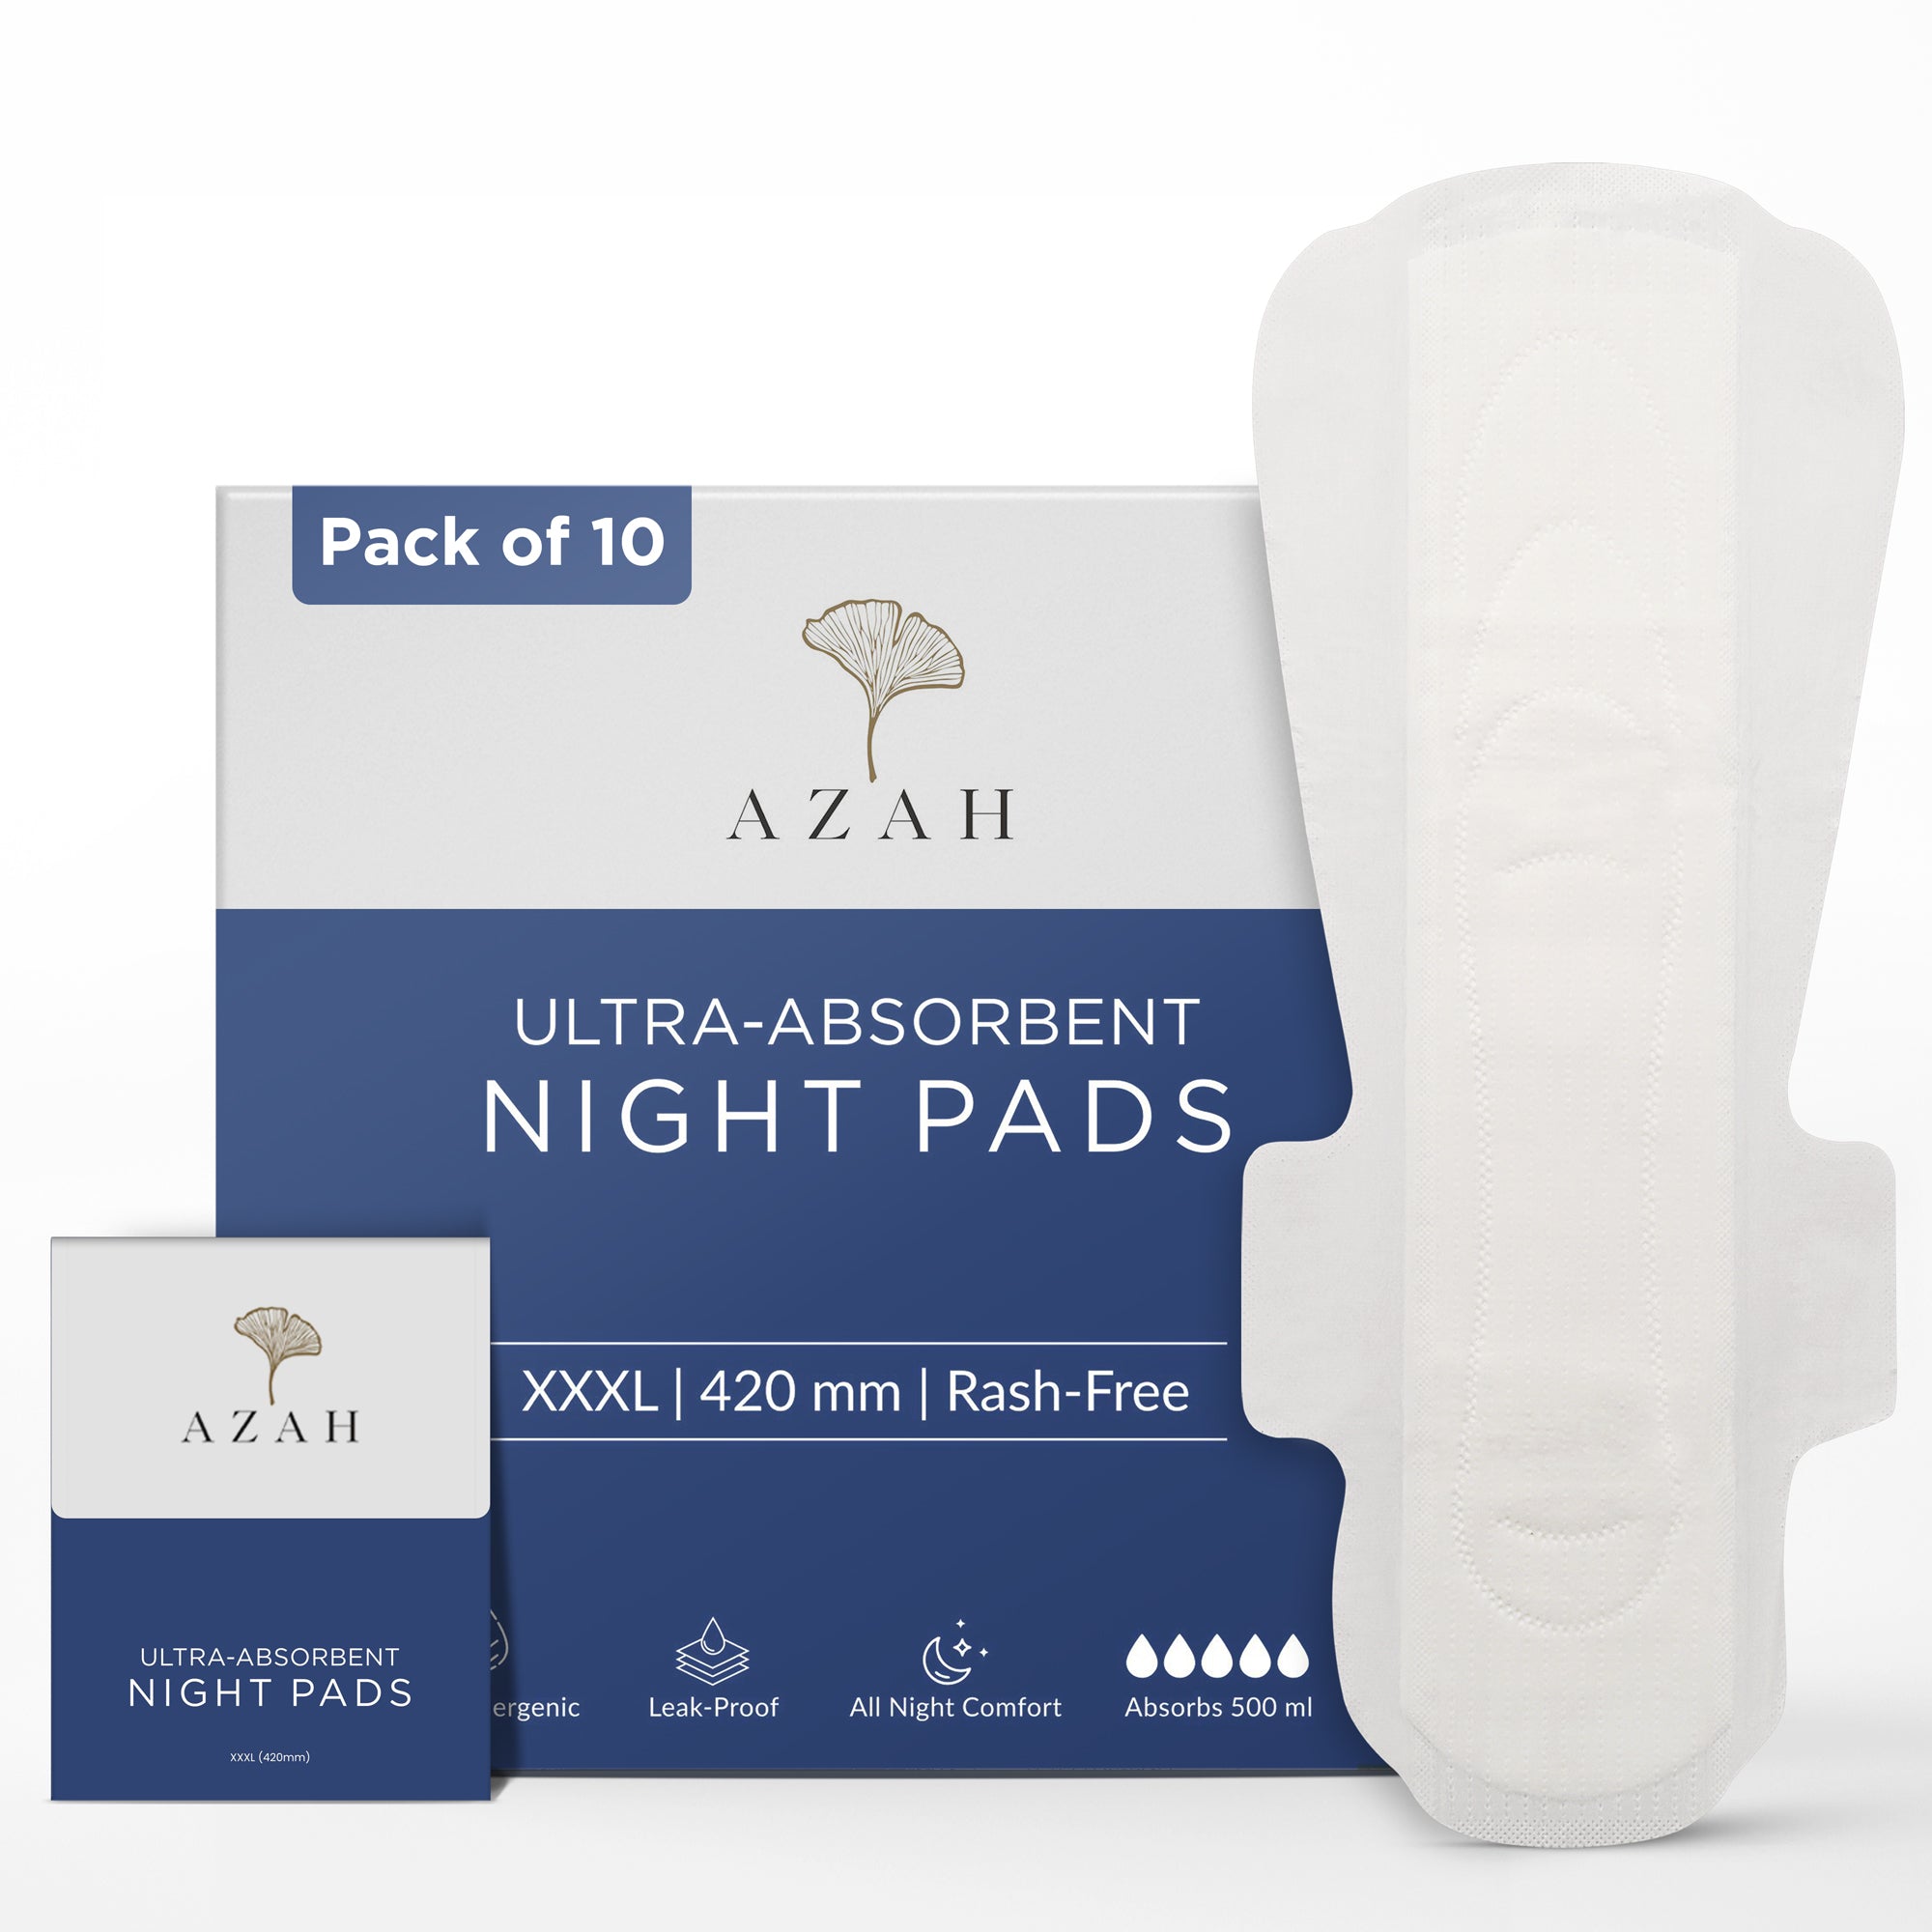 XXXL Pads for Ultra-Absorbent by